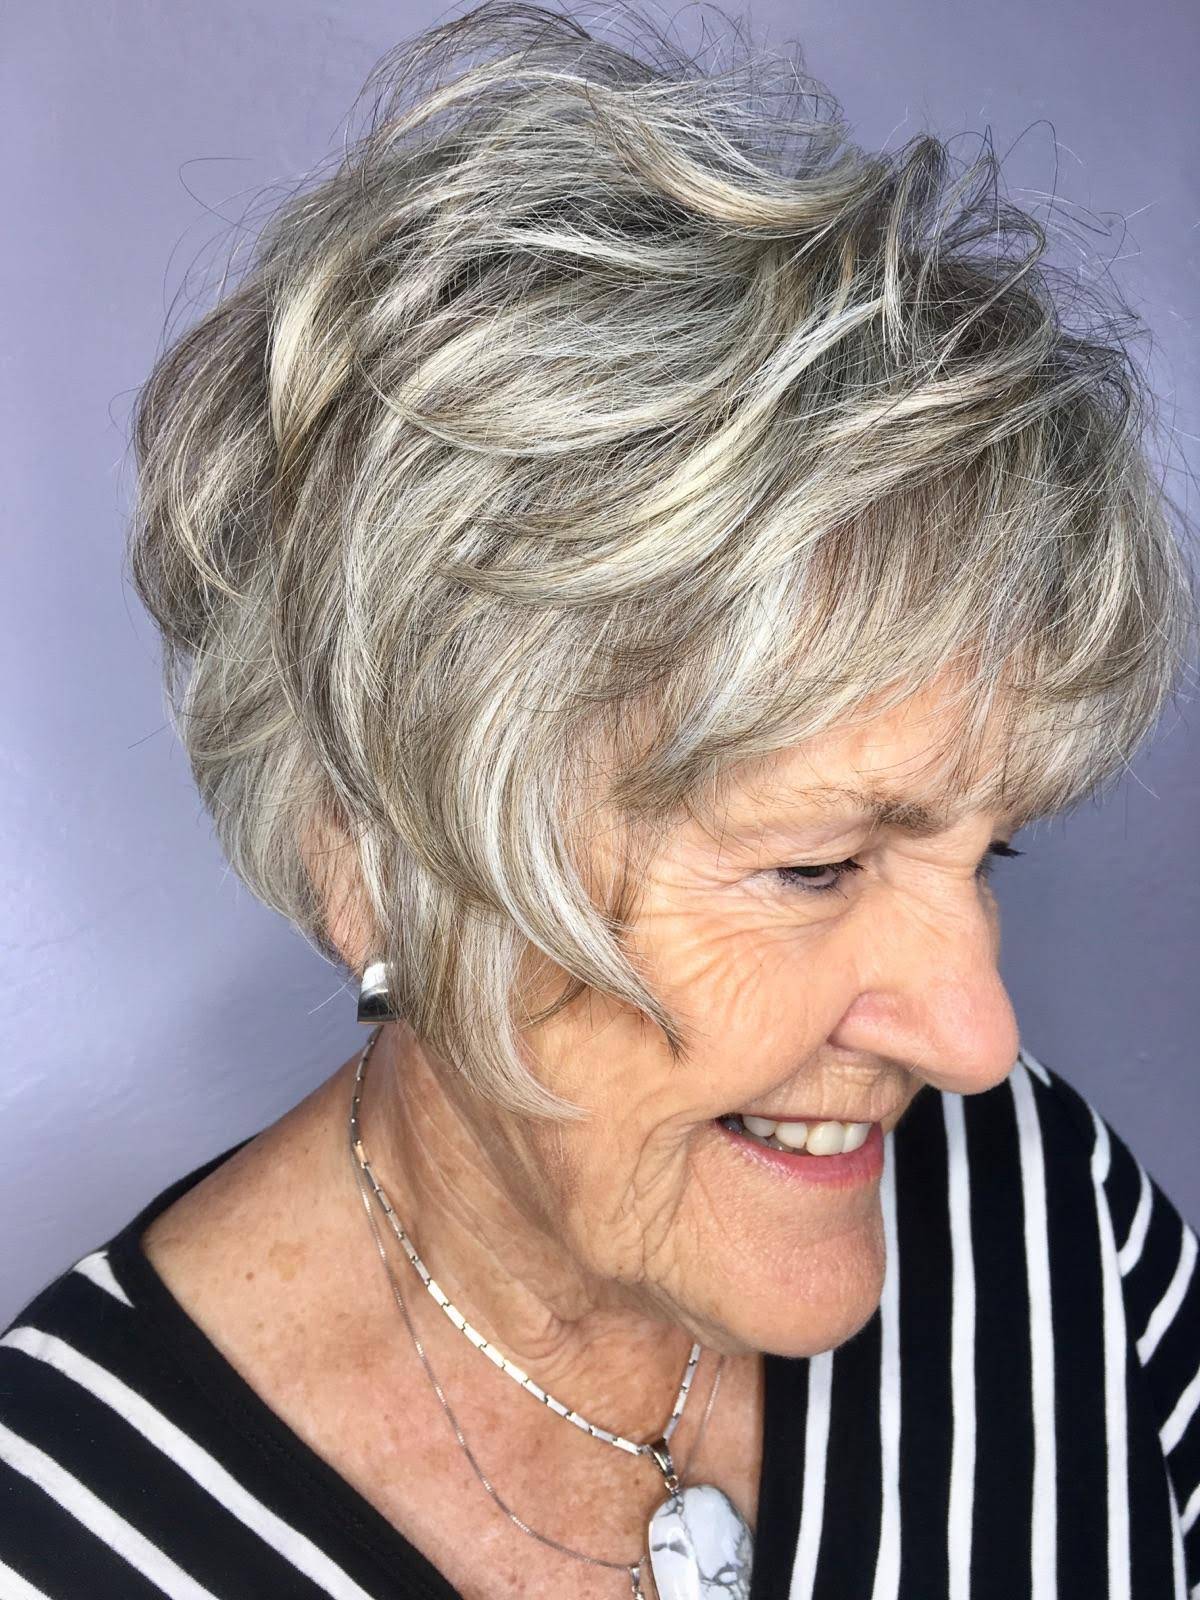 Cute Short Hairstyle with Lowlights on Gray Hair